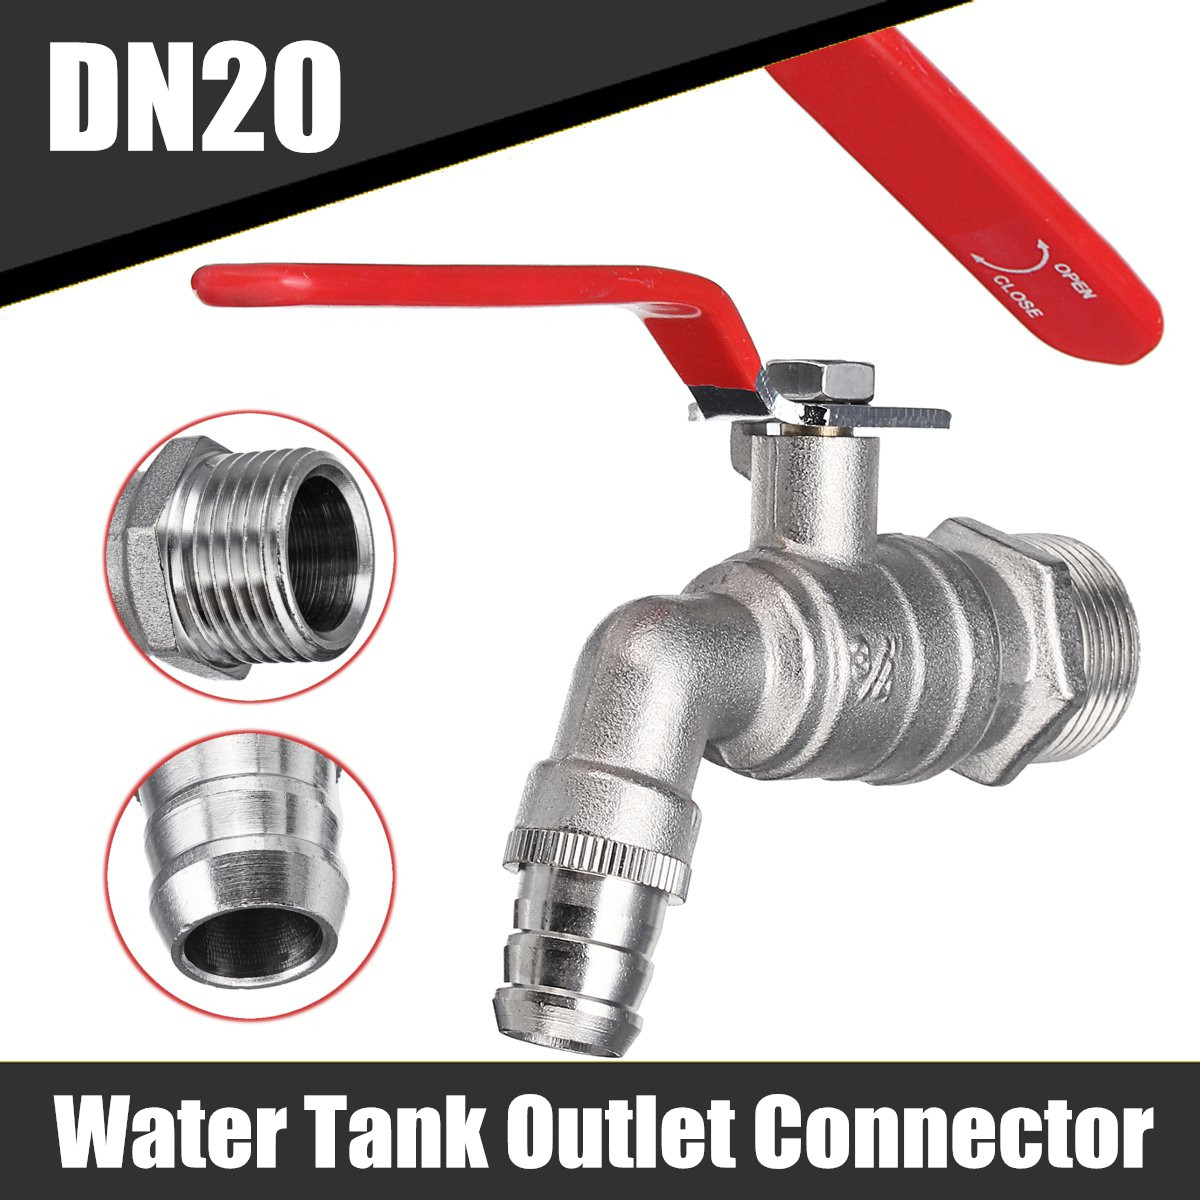 IBC-Brass-Faucet-Water-Tank-Outlet-Connector-Fitting-Adapeter-with-Range-of-Tap-Outlets-1457802